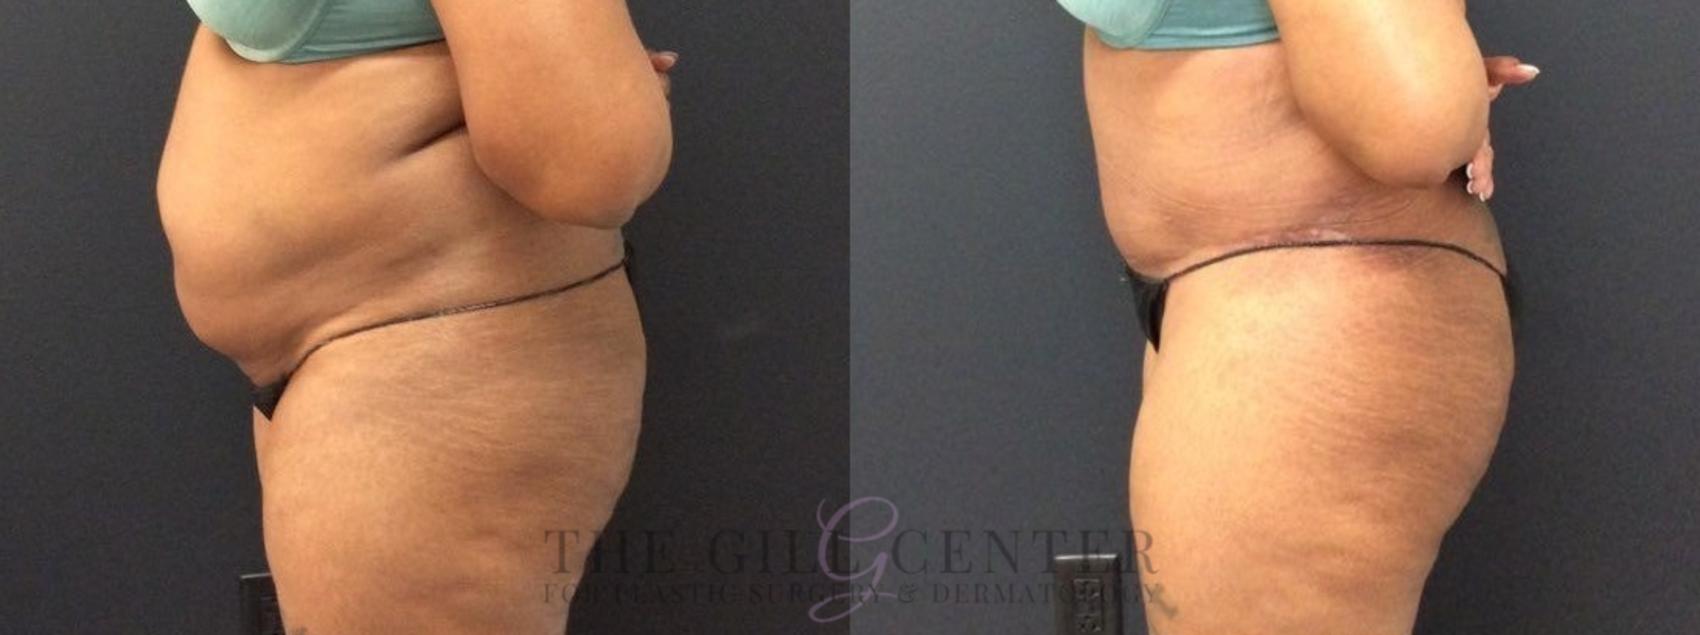 Tummy Tuck Case 454 Before & After Left Side | The Woodlands, TX | The Gill Center for Plastic Surgery and Dermatology